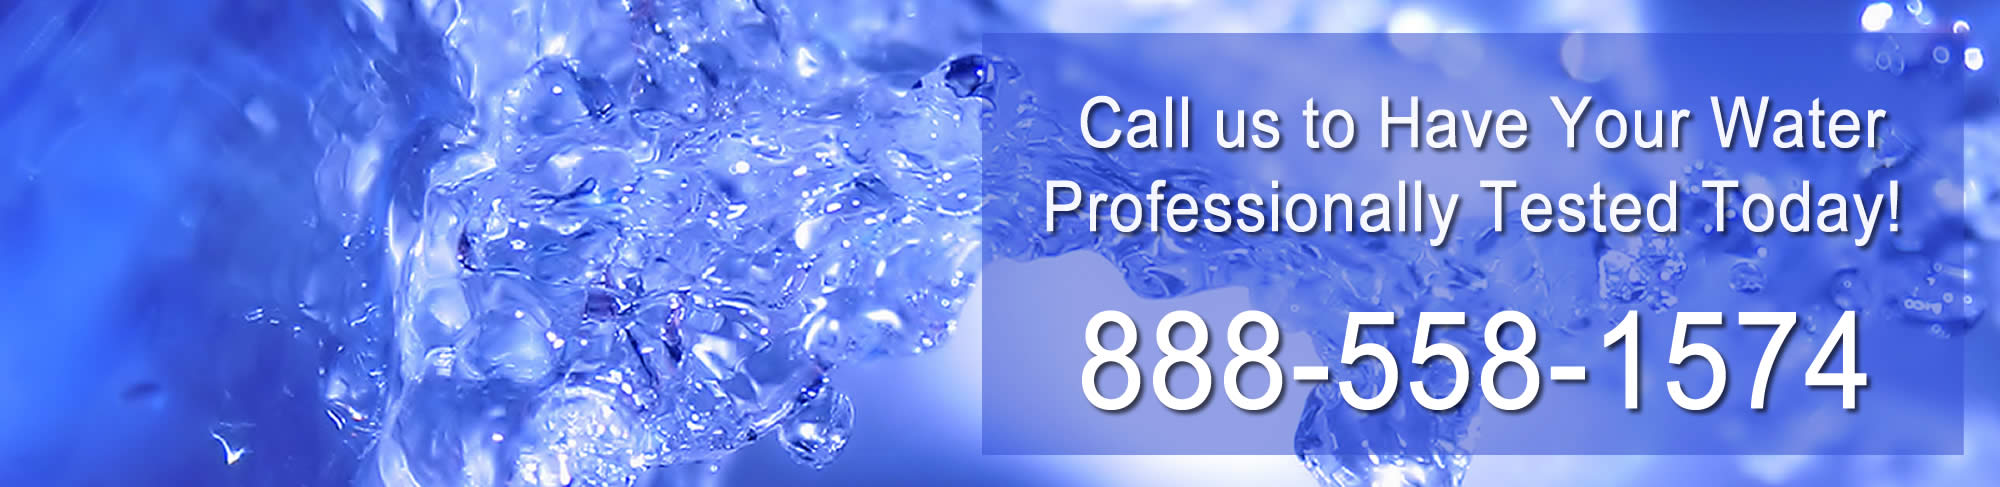 Specializing in Branford CT Water Testing and Analysis